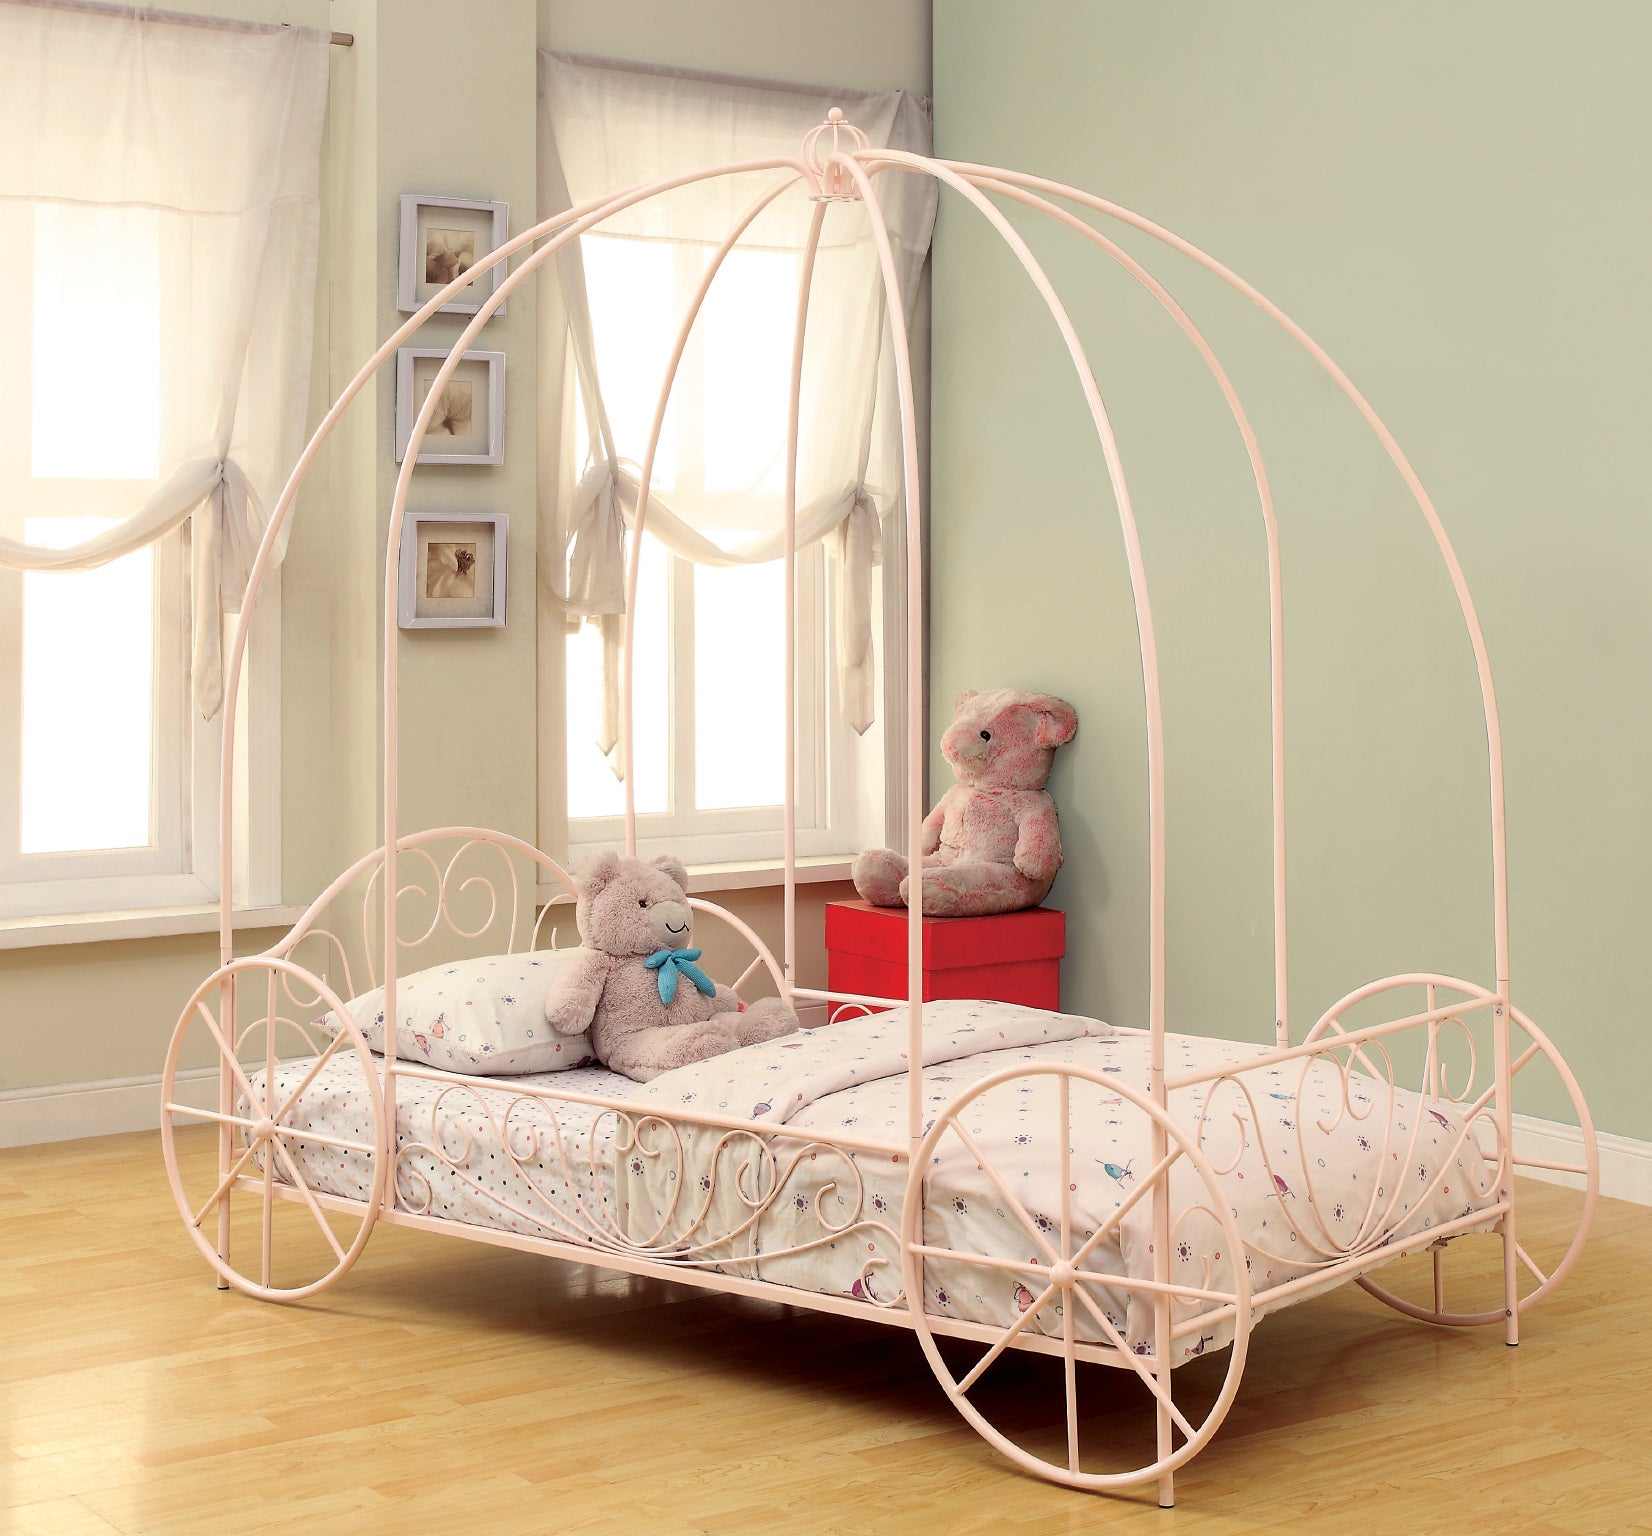 SB9873 - Twin Canopy Bed